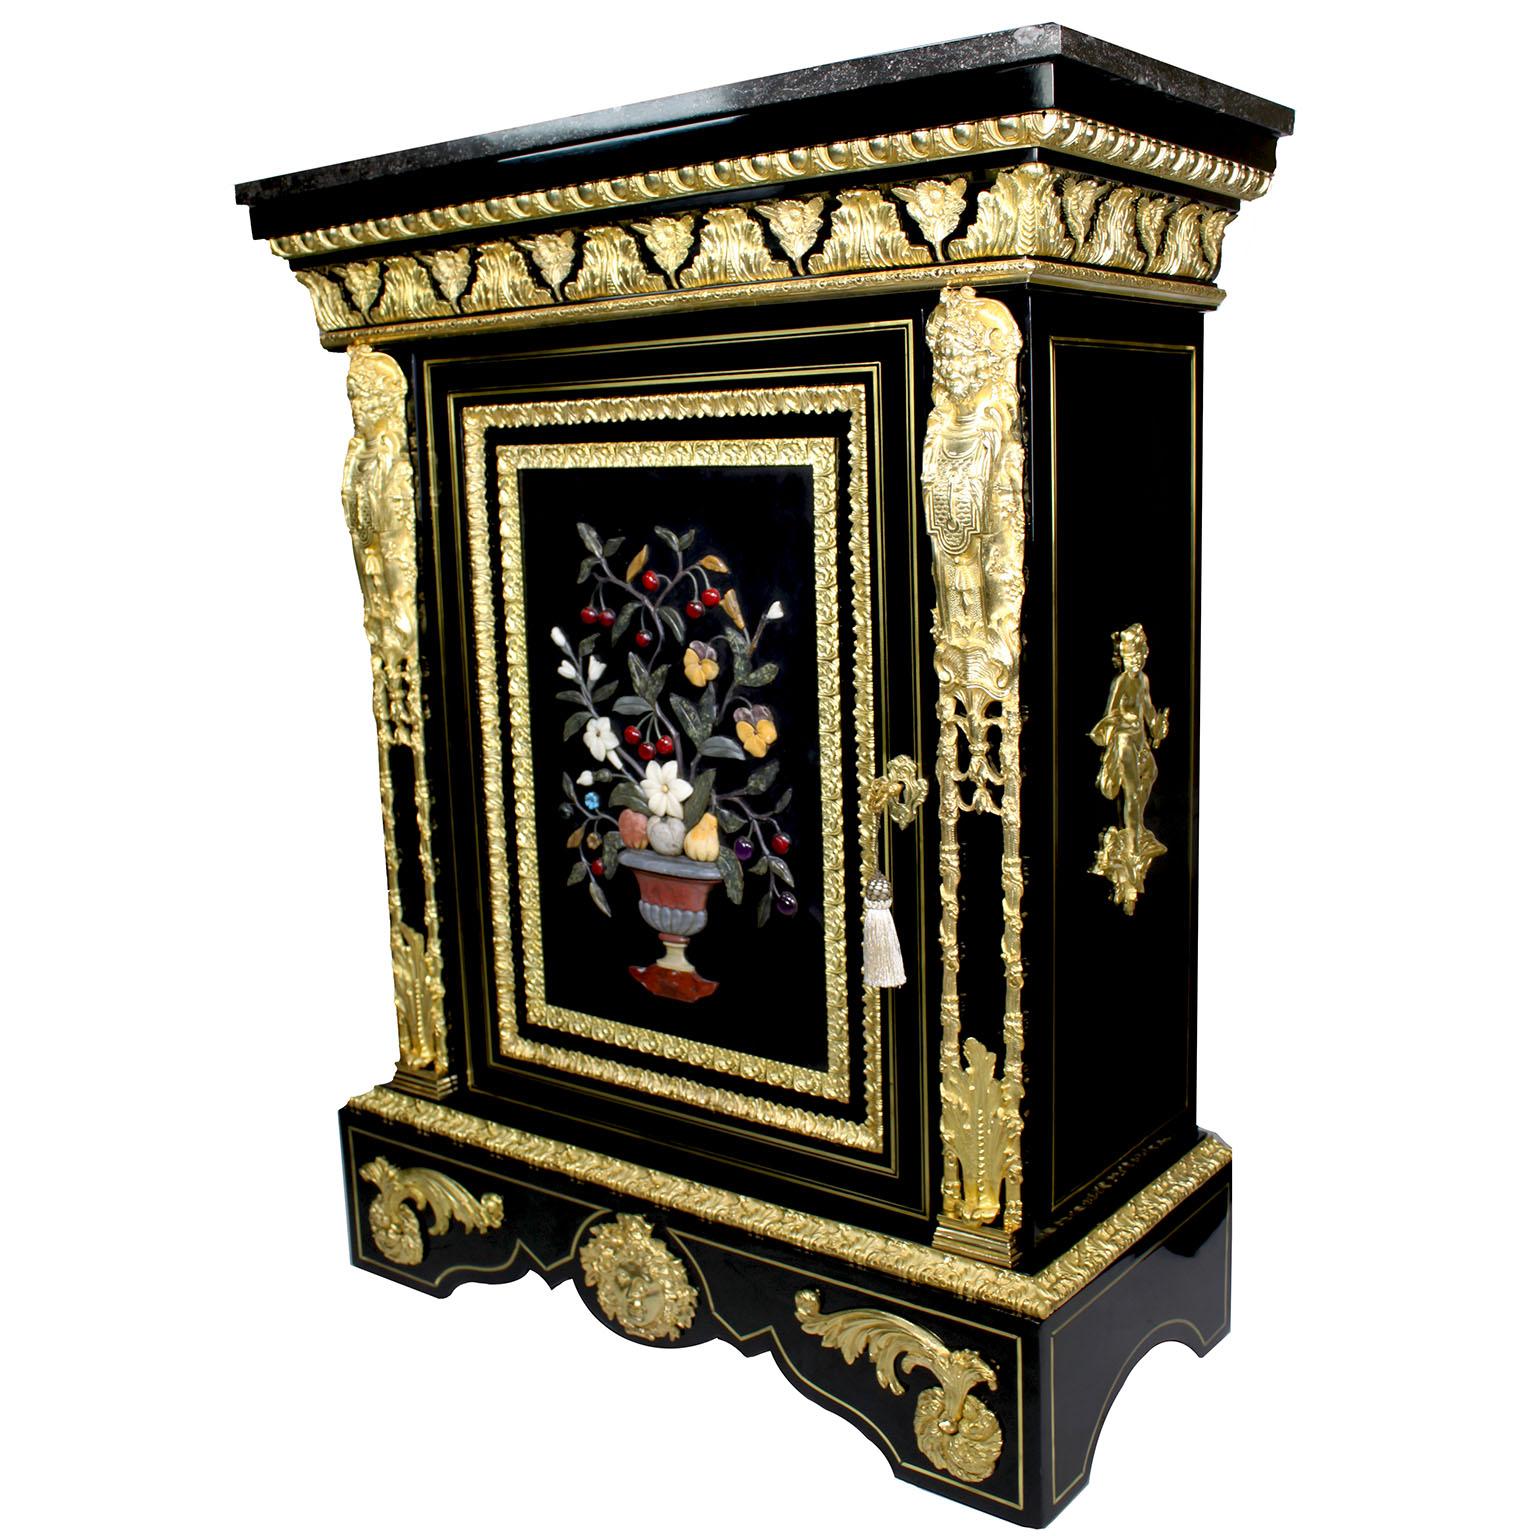 A very fine French 19th century Napoleon III Ormolu Mounted Ebonized wood and Pietra Dura Meuble d'Appui à Hauteur with a grey marble top. The single front-door black-lacquered cabinet centered with a Pietra Dure (Semi precious hard stones) plaque